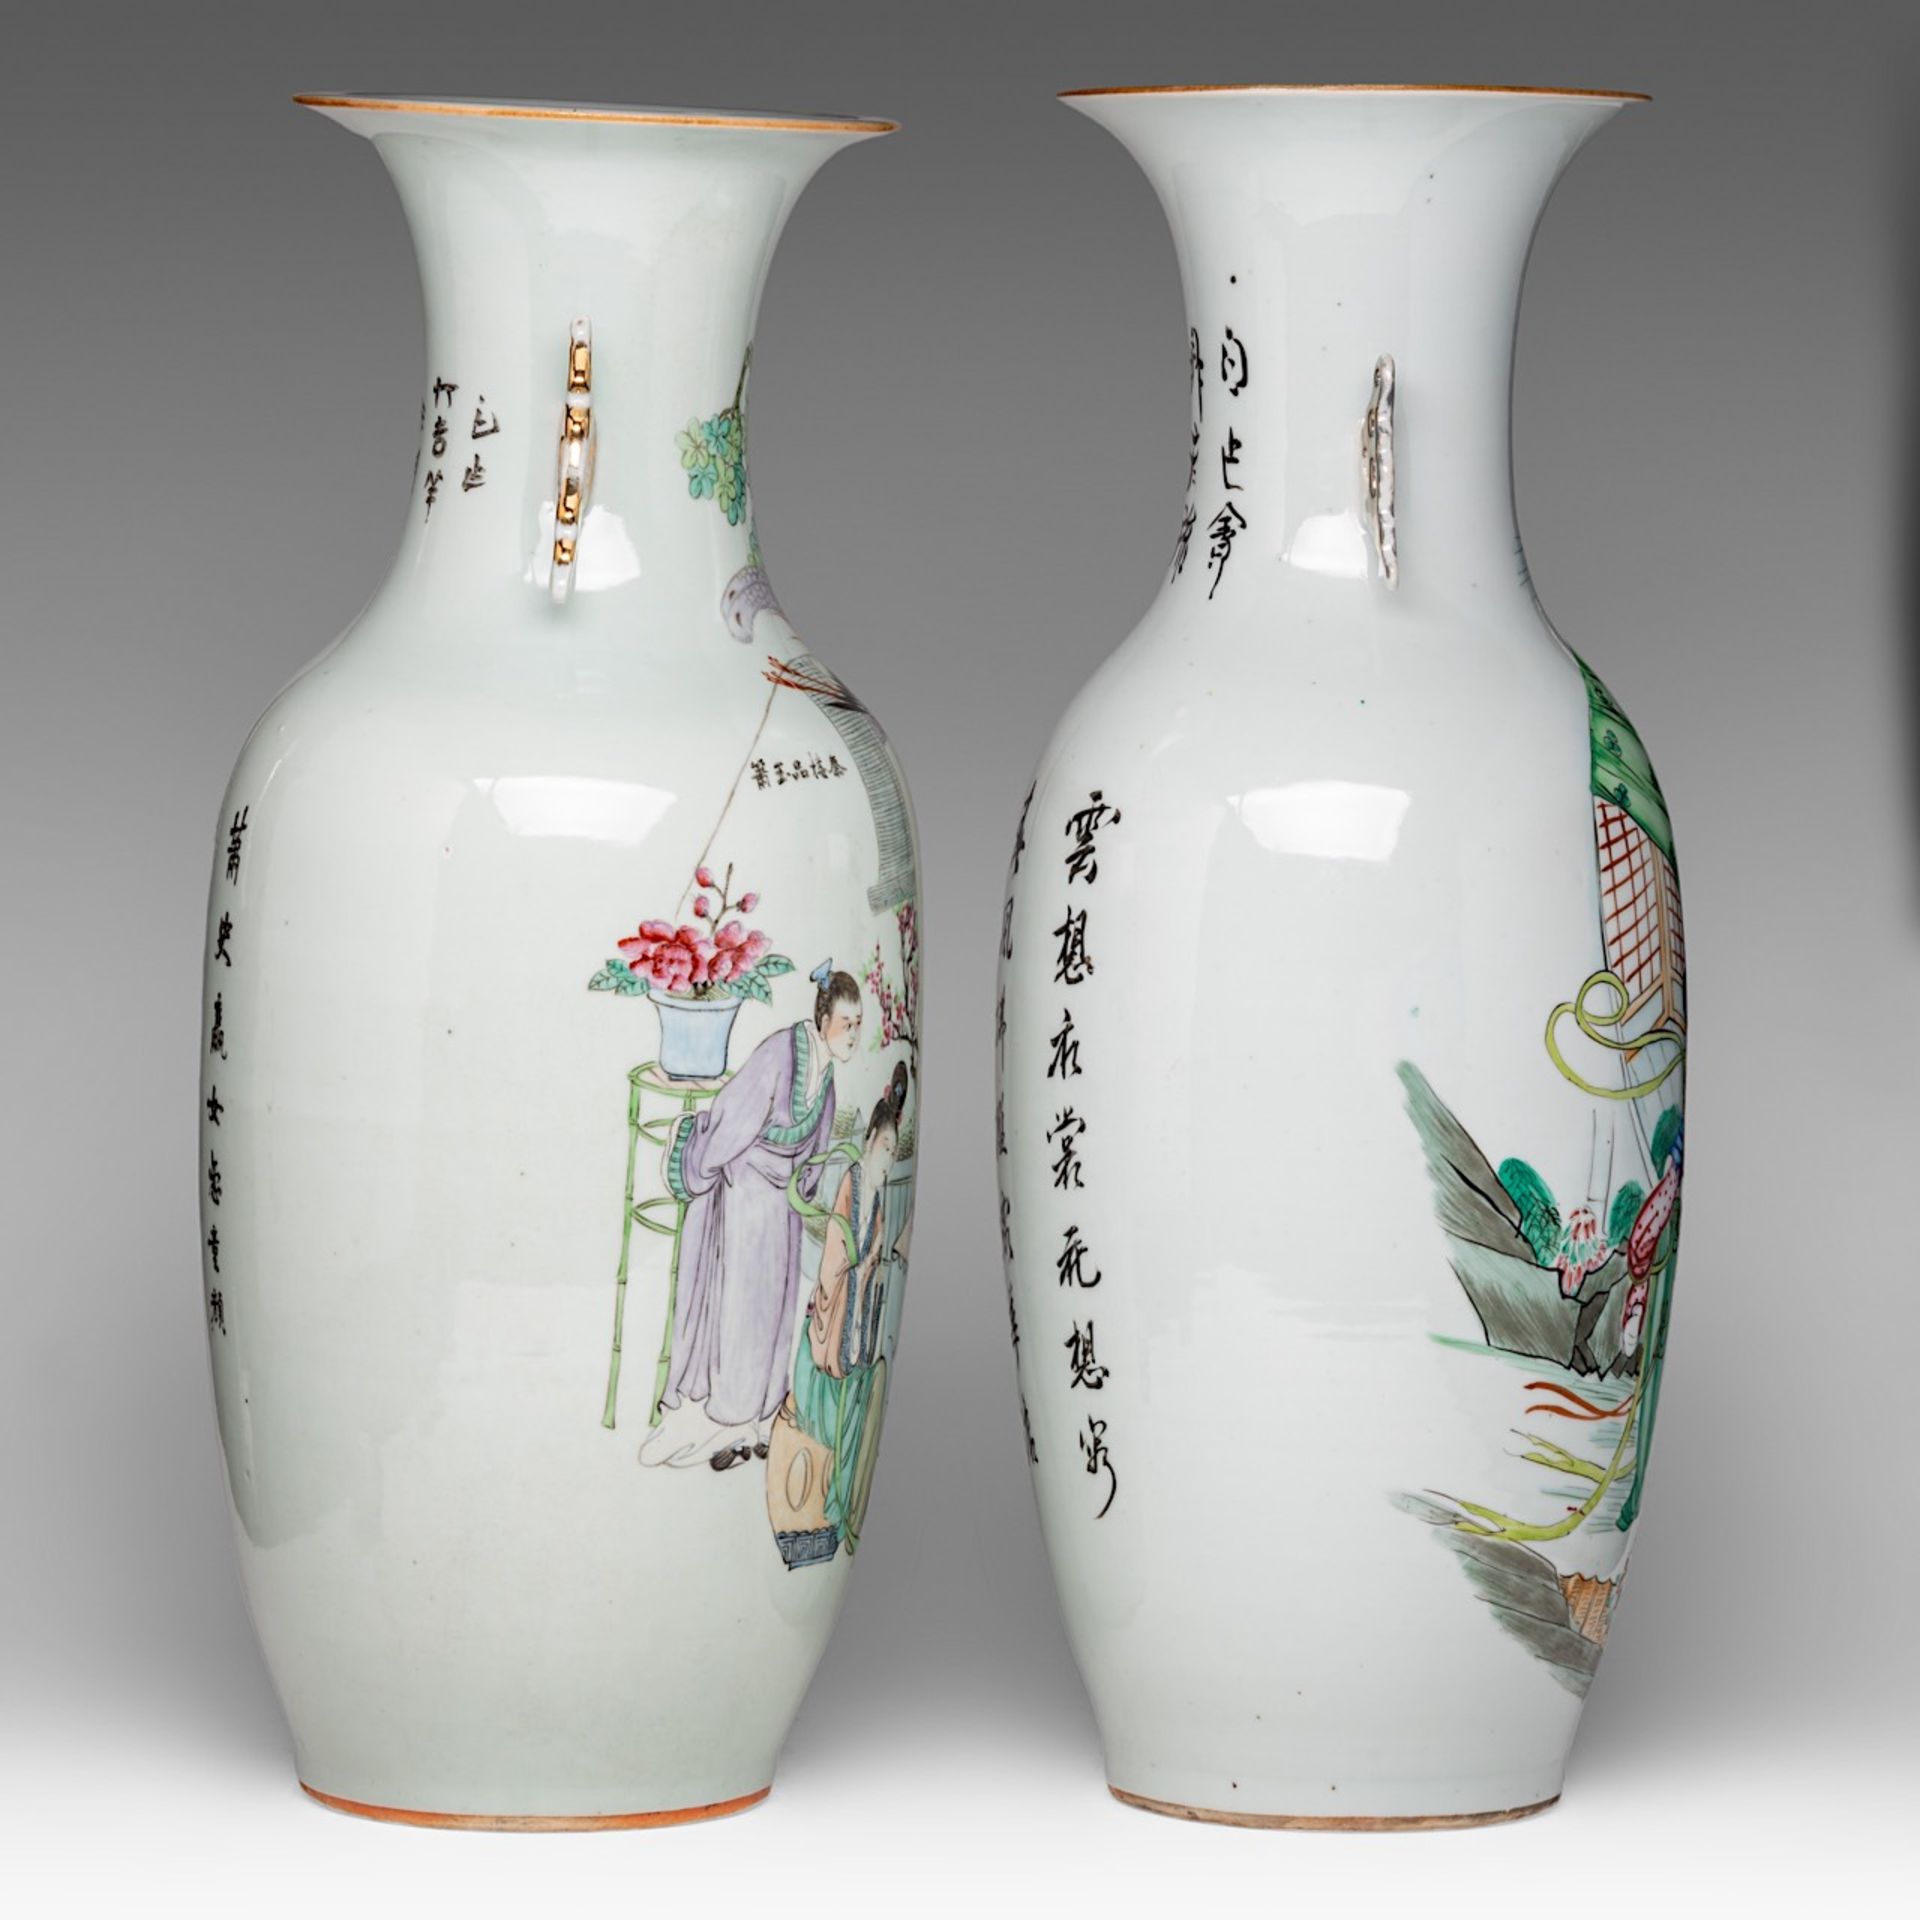 A Chinese Qianjiangcai and a famille rose vase, both with a signed text, Republic period, H 58 cm - Bild 4 aus 6